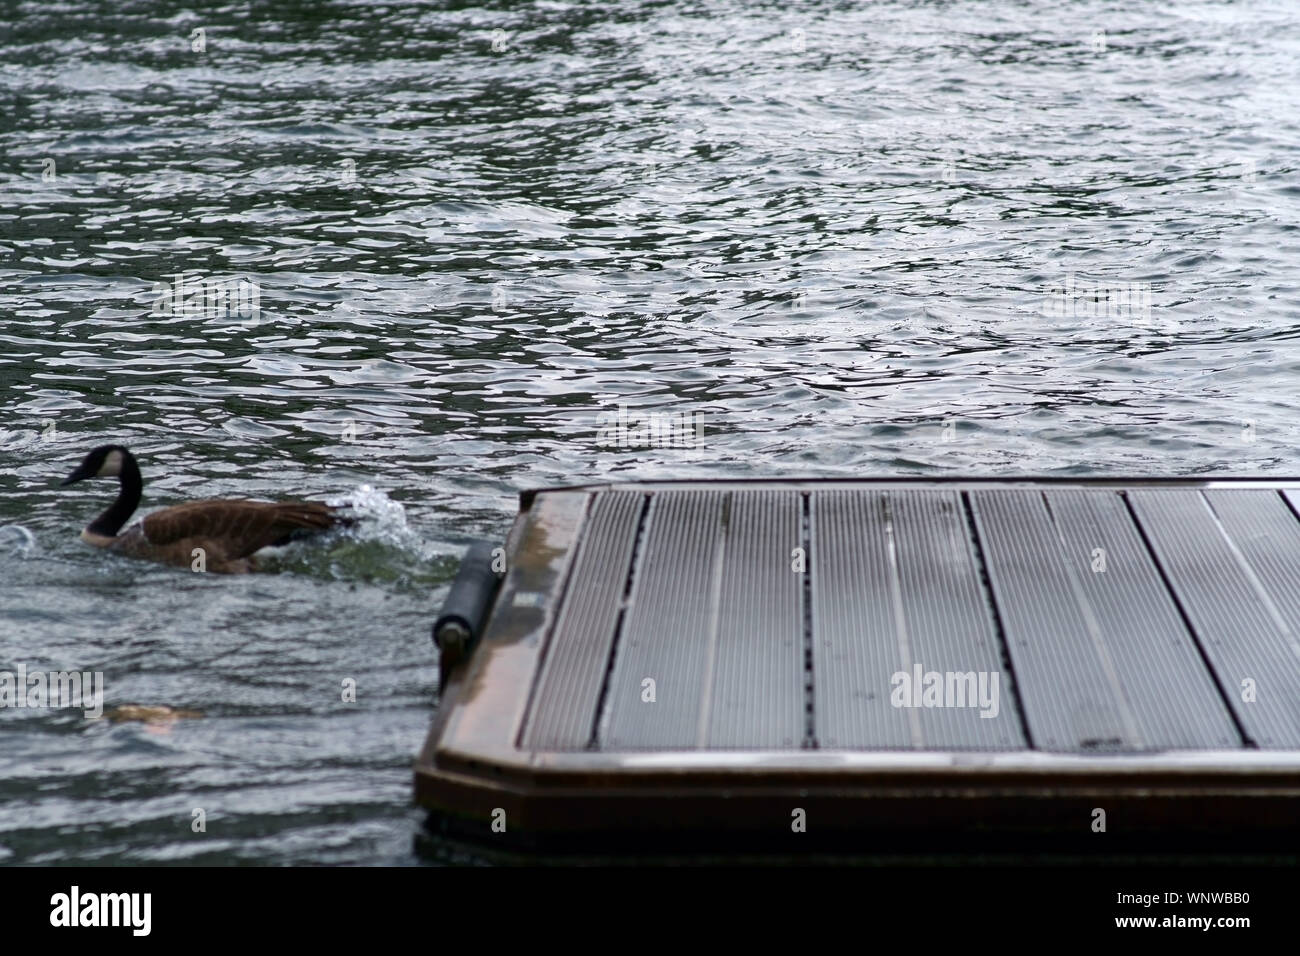 A Canada goose jumps from a dock into the water. Stock Photo